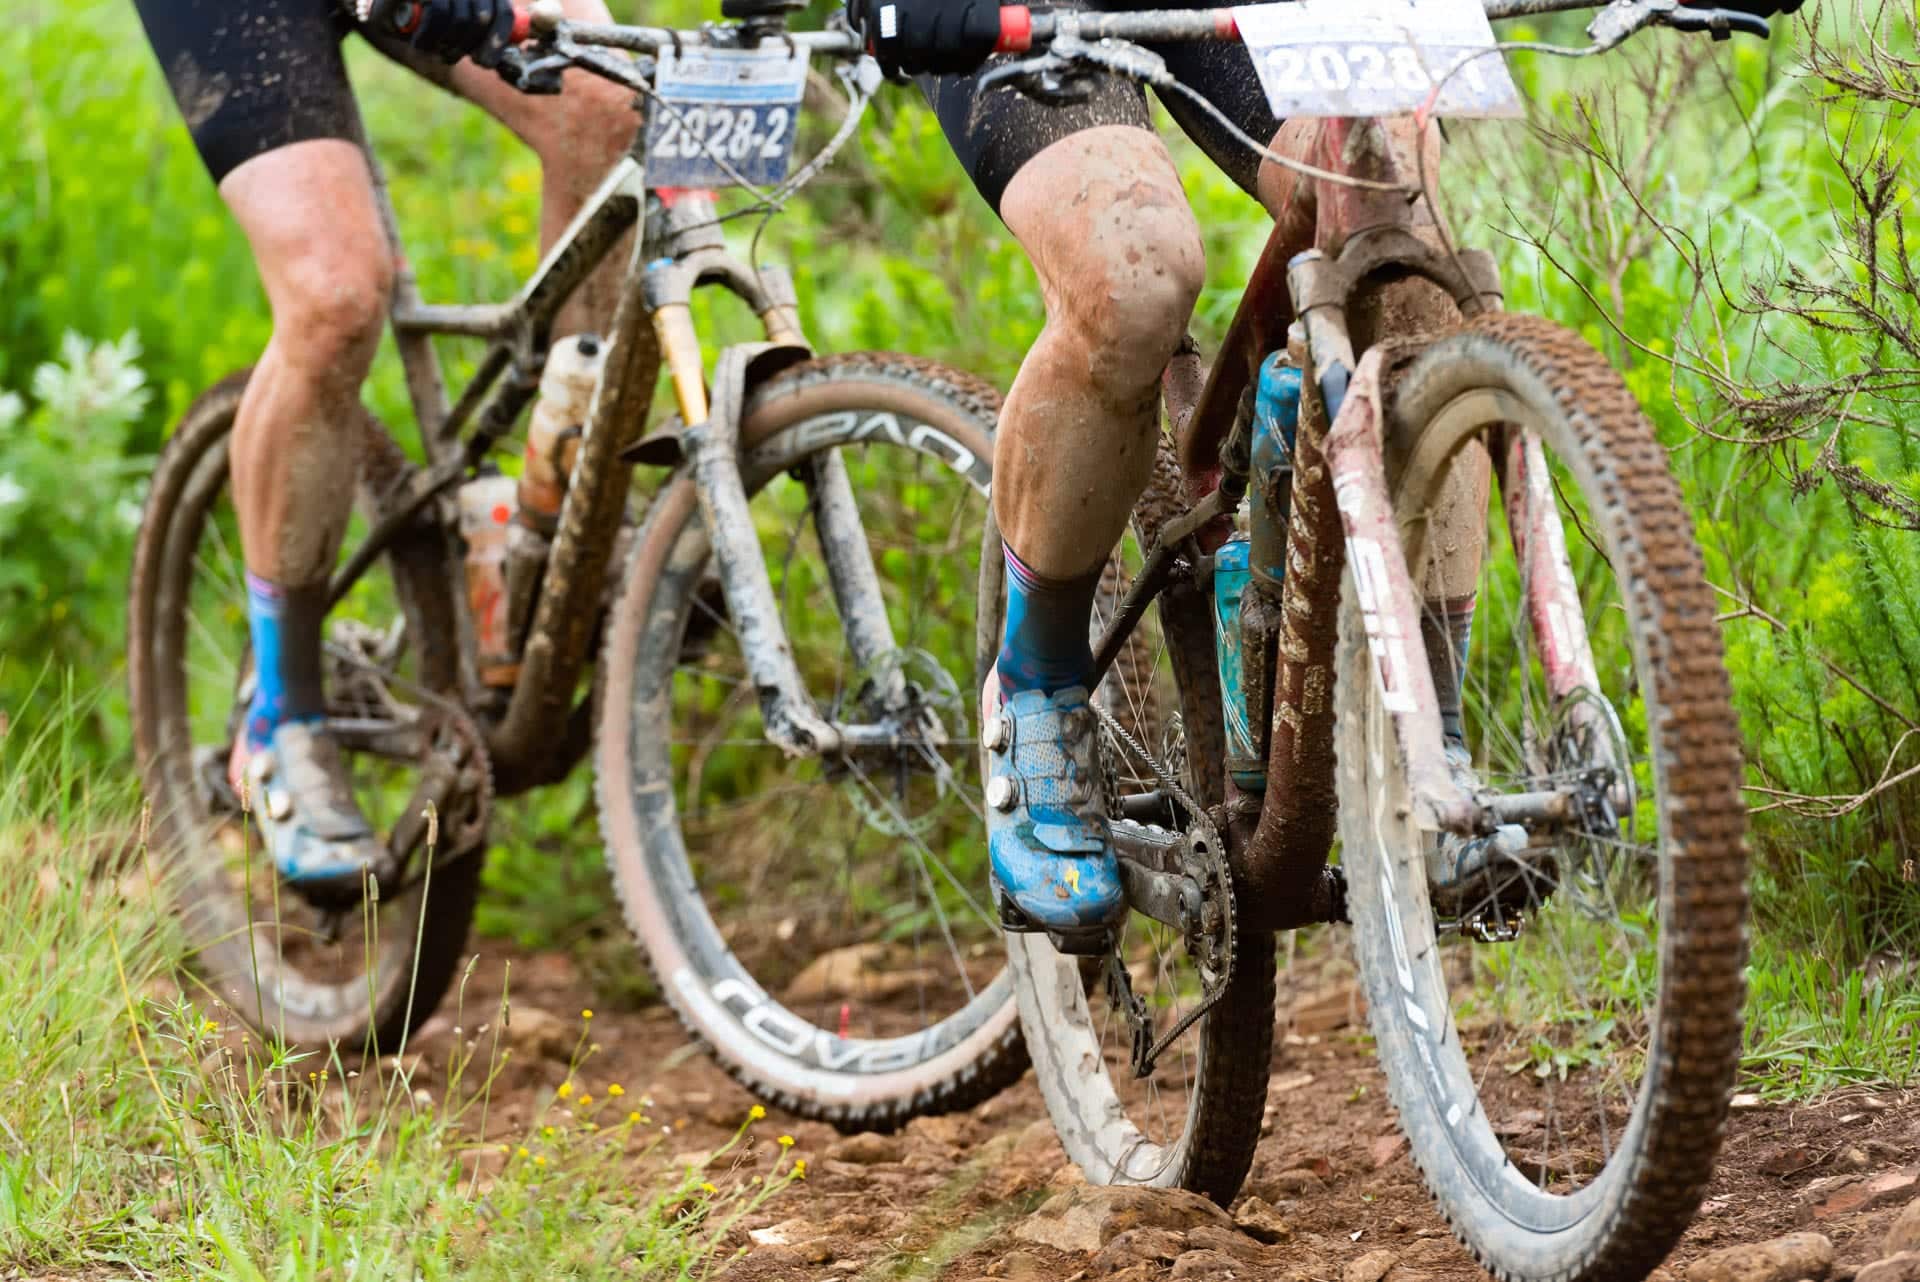 What Is The Correct Bike For The KAP sani2c?